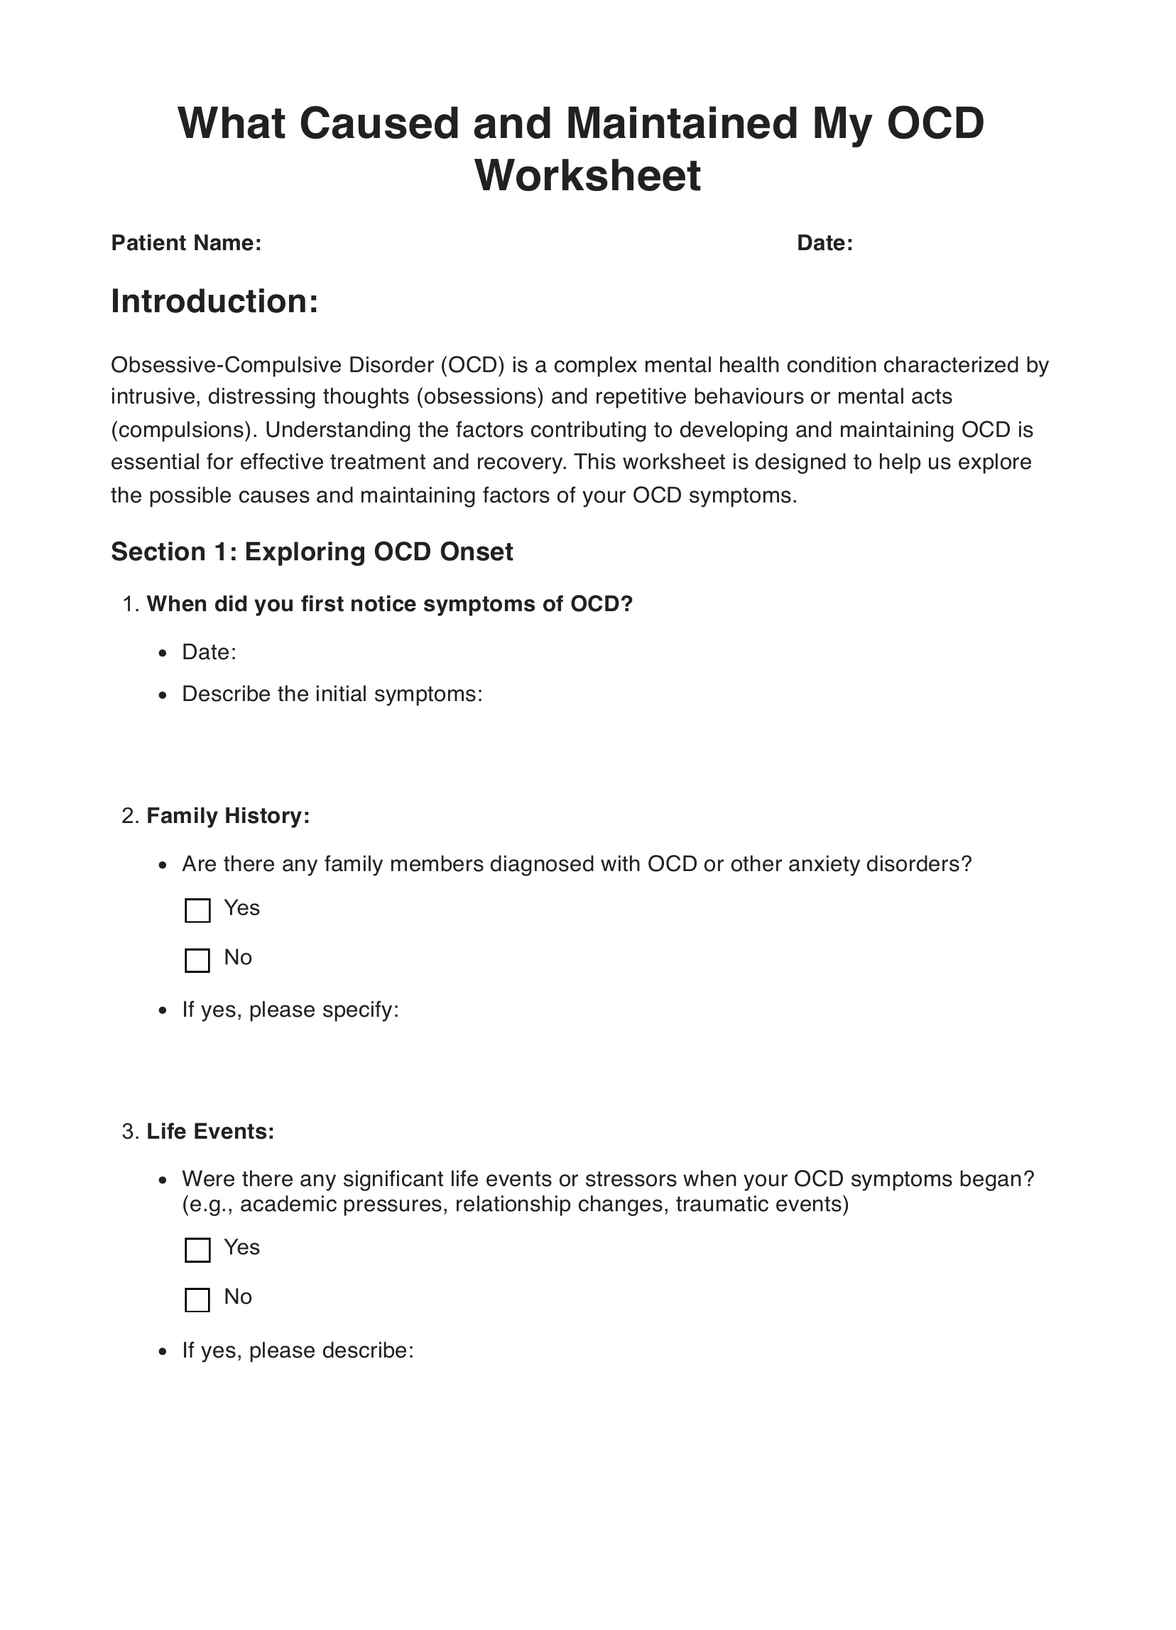 What Caused and Maintains My OCD Worksheet PDF Example